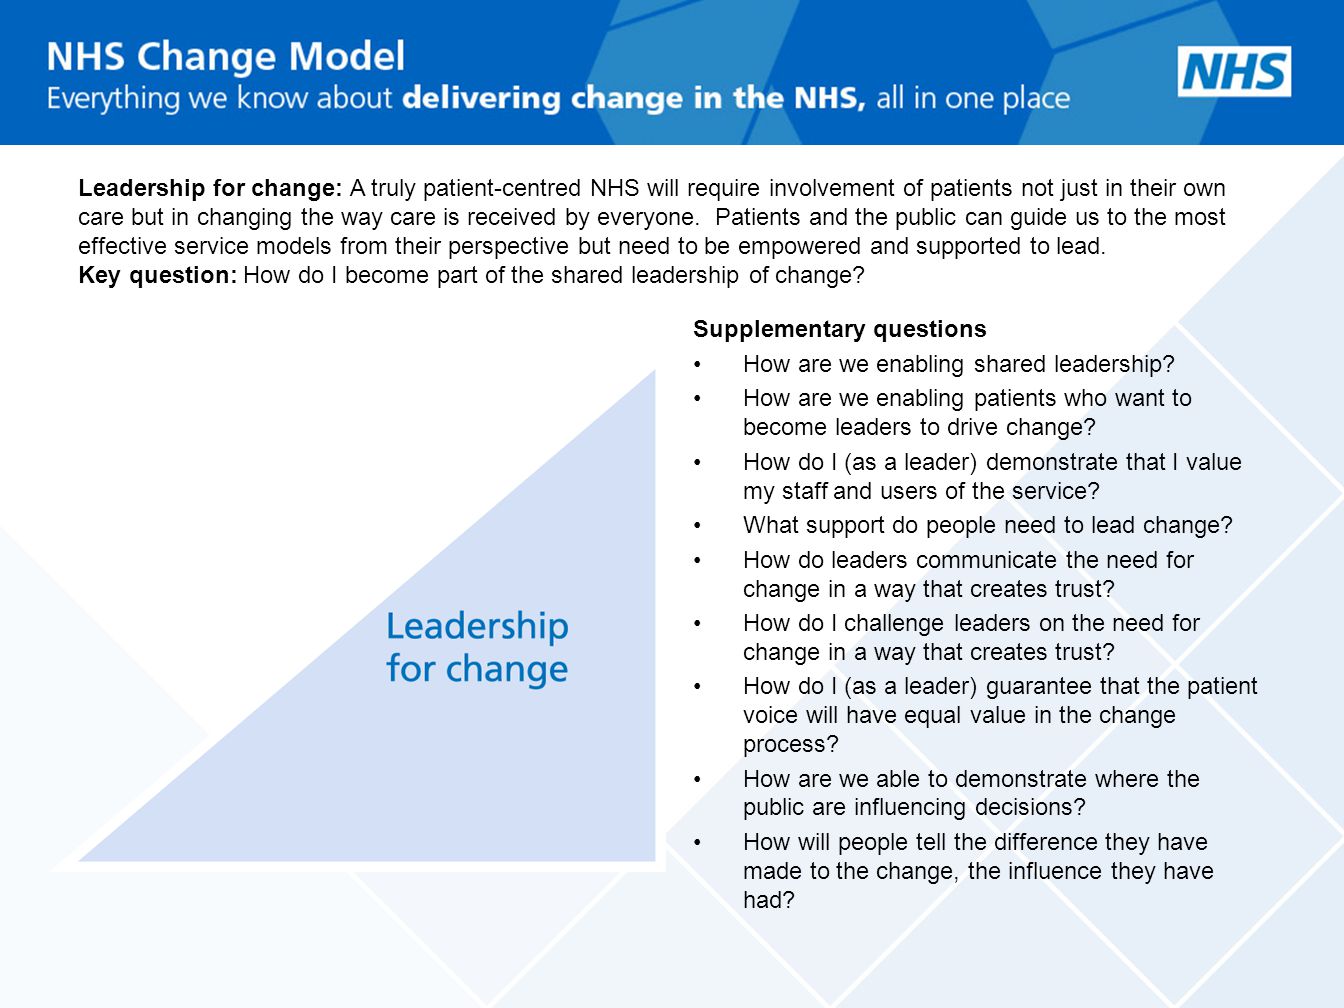 Leadership for change: A truly patient-centred NHS will require involvement of patients not just in their own care but in changing the way care is received by everyone. Patients and the public can guide us to the most effective service models from their perspective but need to be empowered and supported to lead. Key question: How do I become part of the shared leadership of change